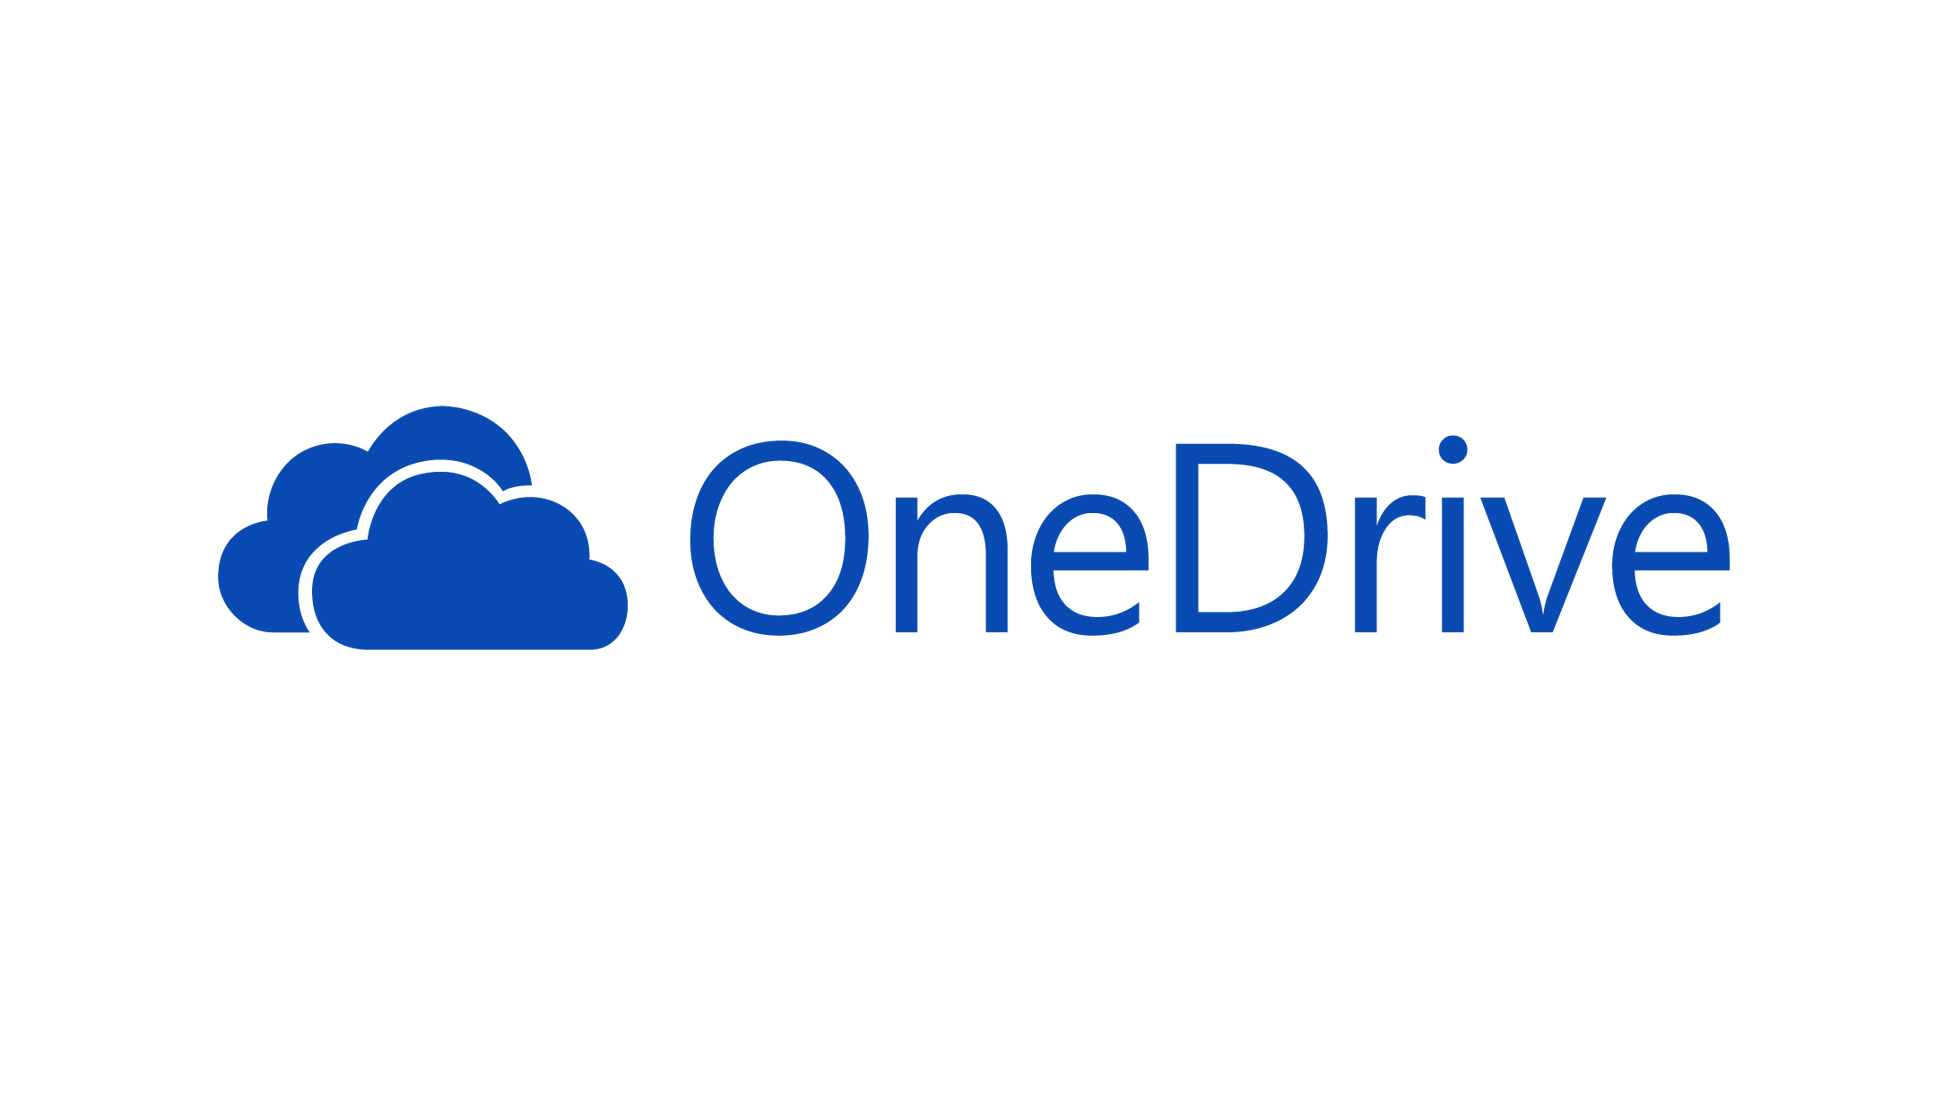 microsoft onedrive for business encryption